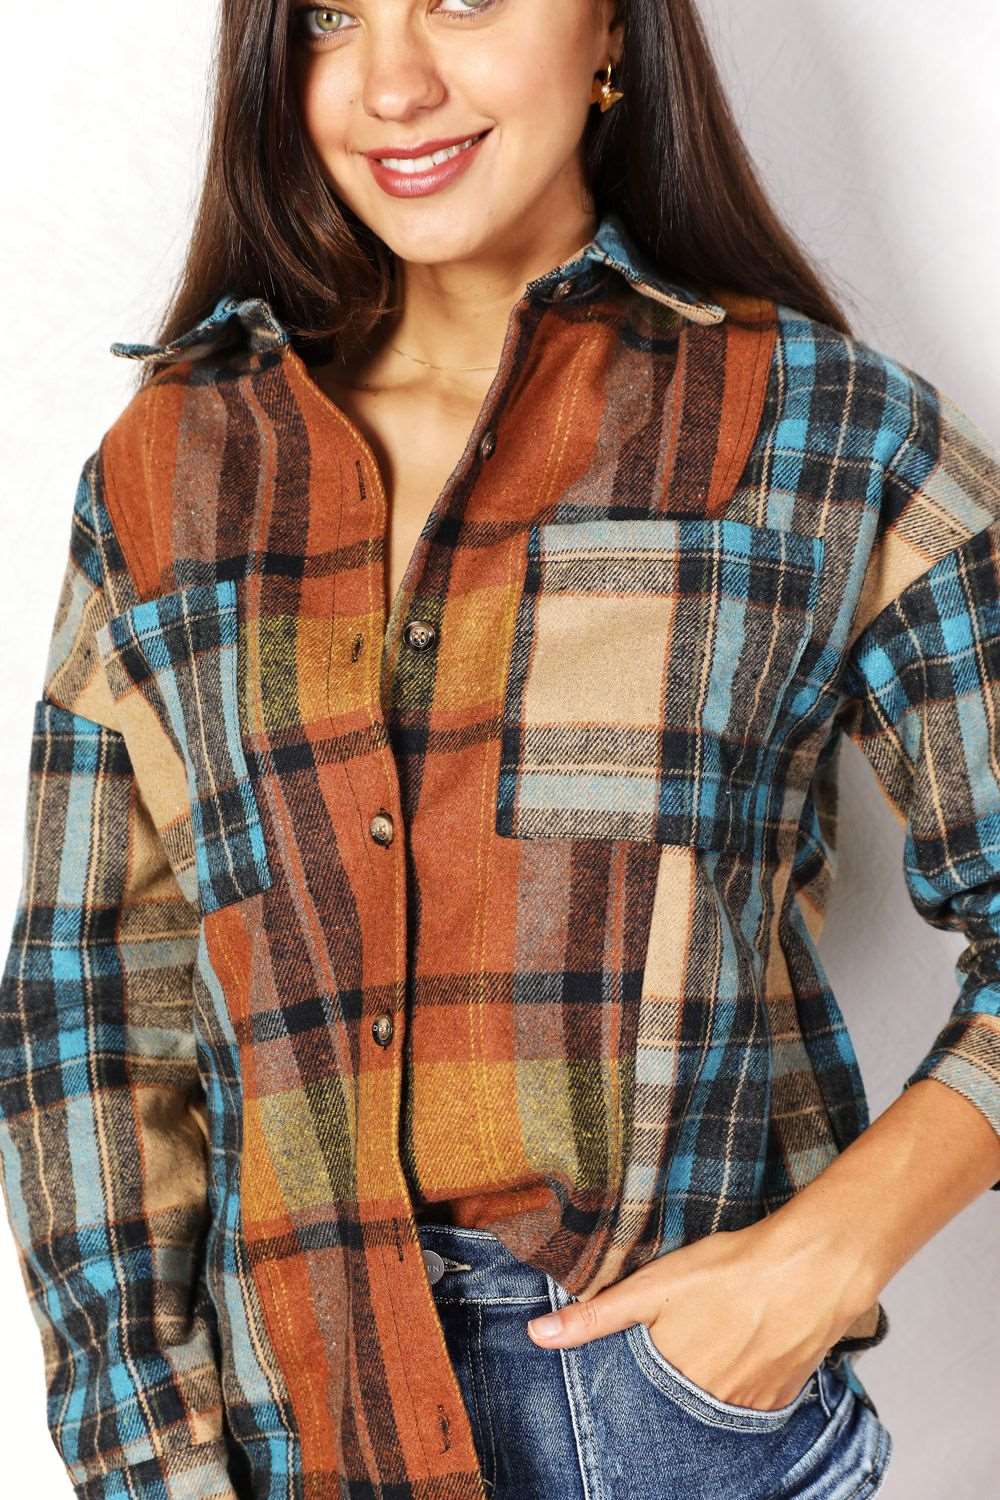 Double Take Plaid Curved Hem Shirt Jacket with Breast Pockets  Krazy Heart Designs Boutique   